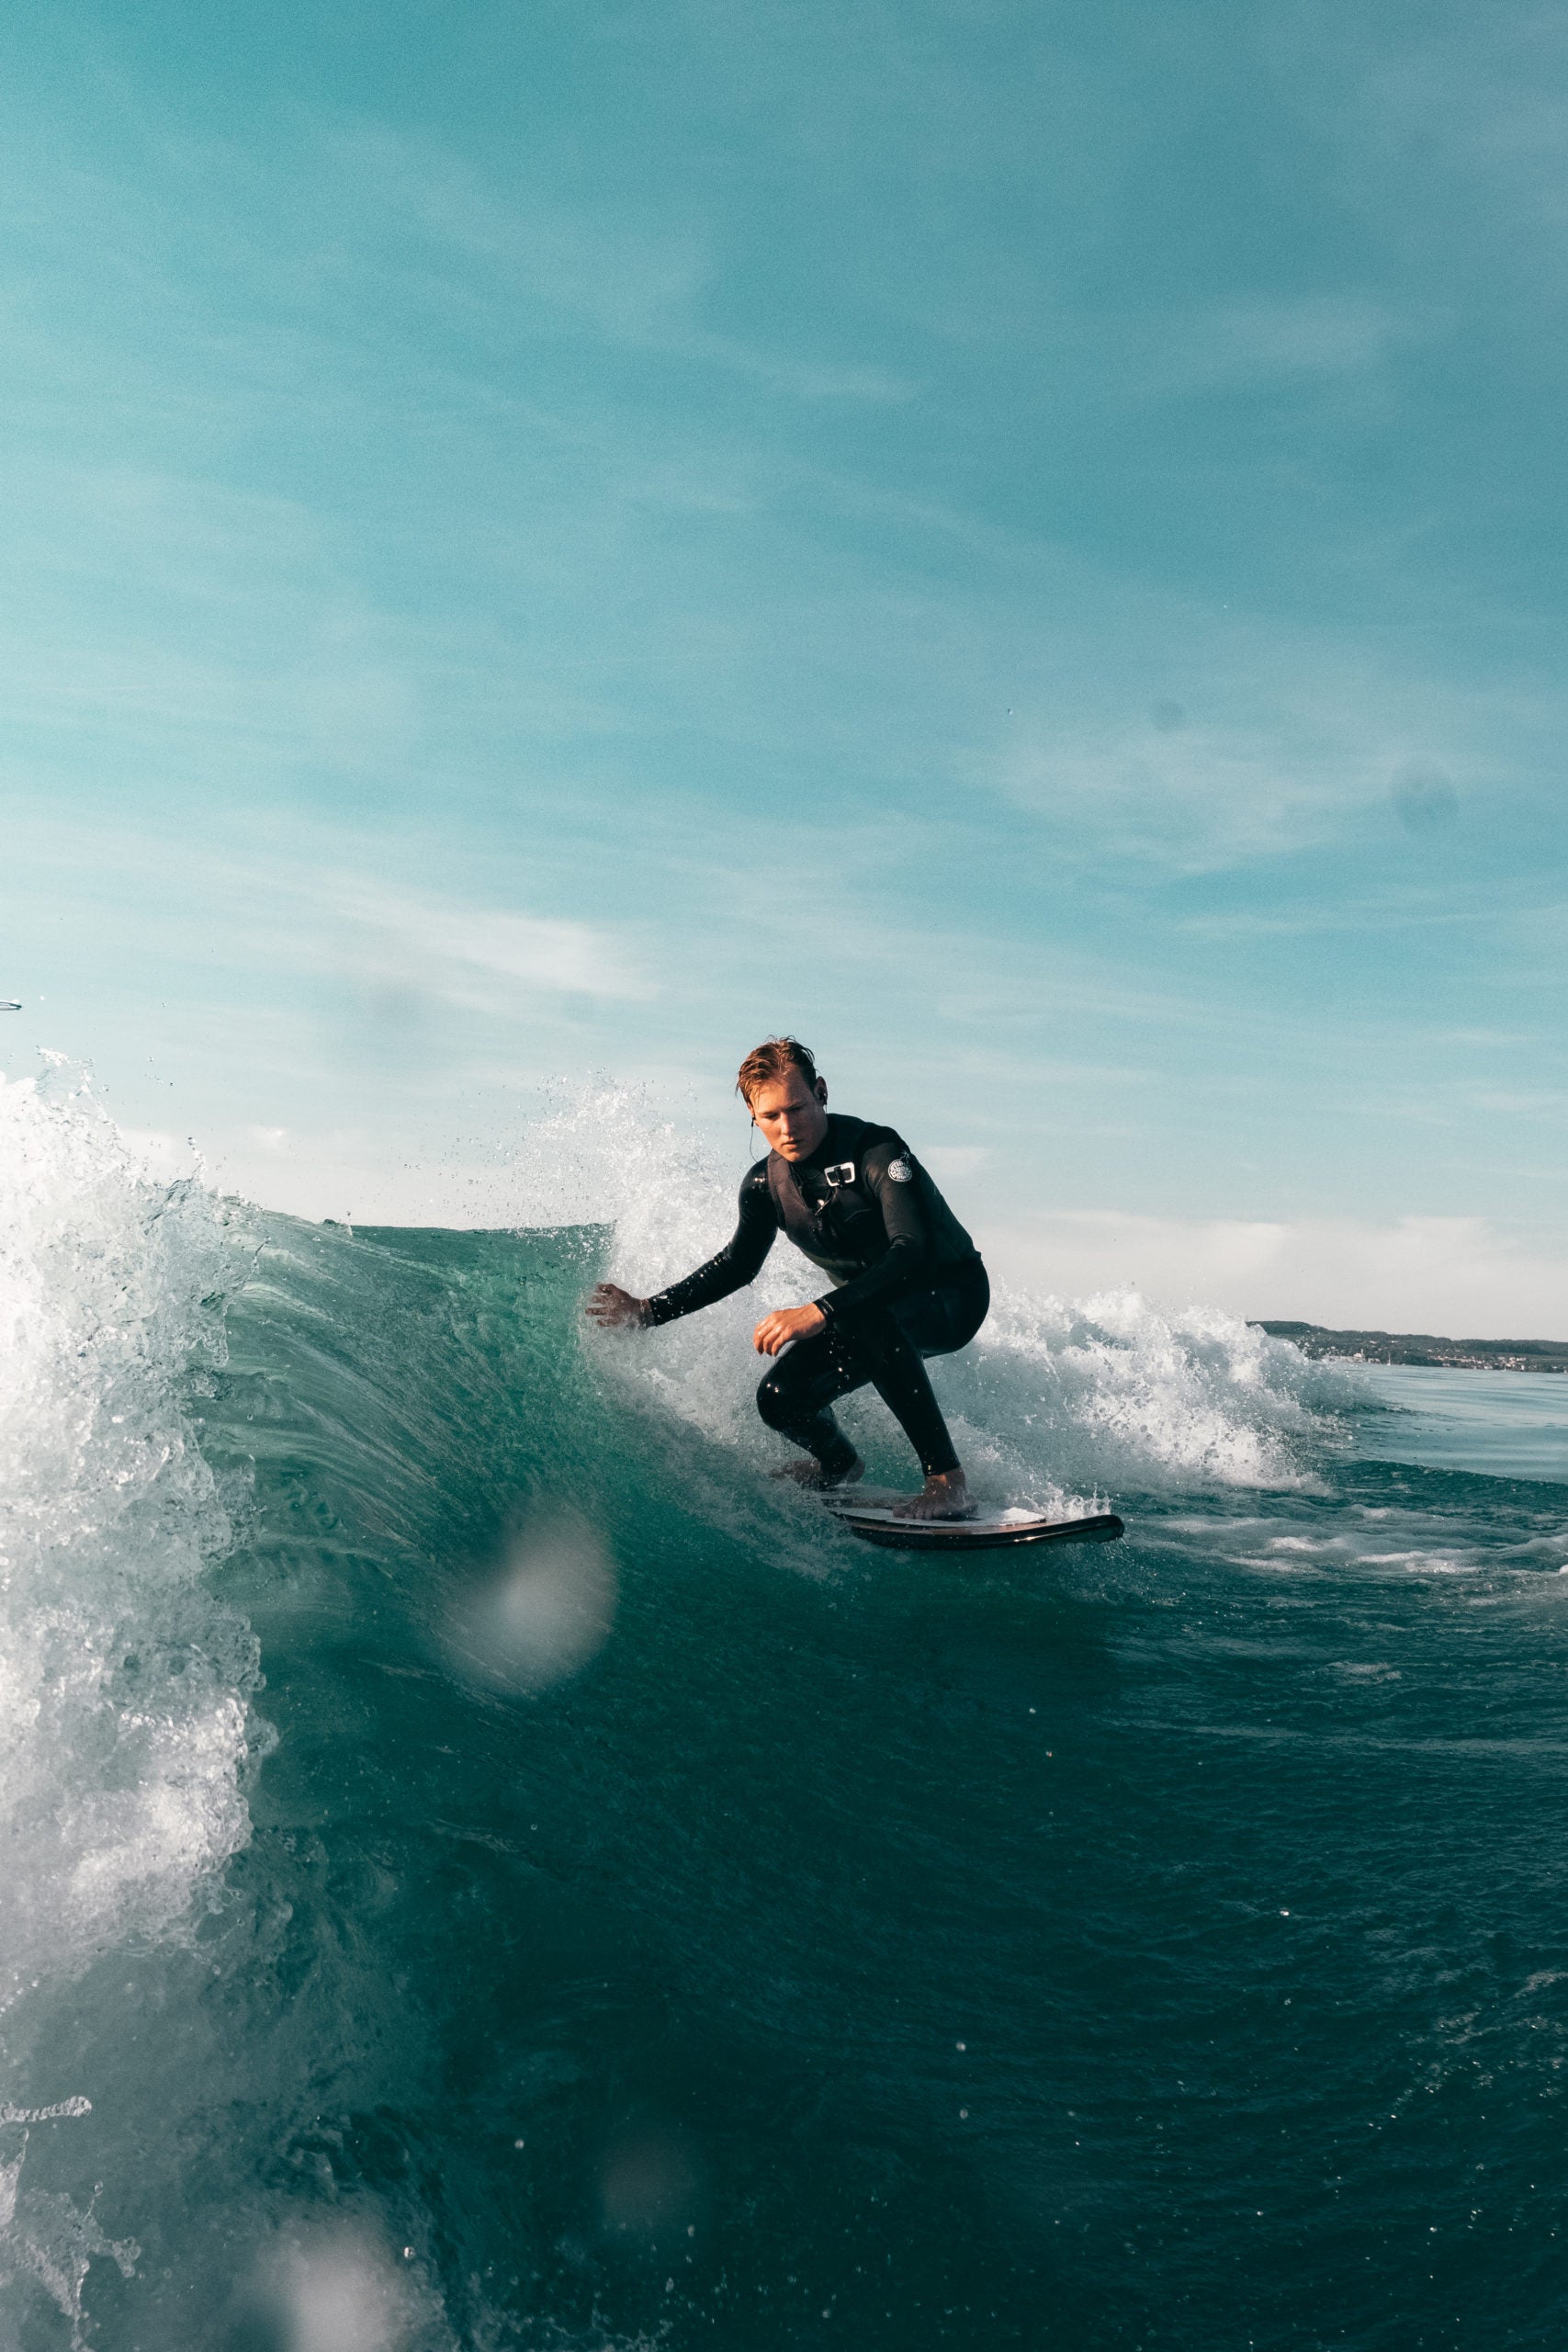 Cardo systems NZ | Packtalk outdoor shown on surfer riding a wave